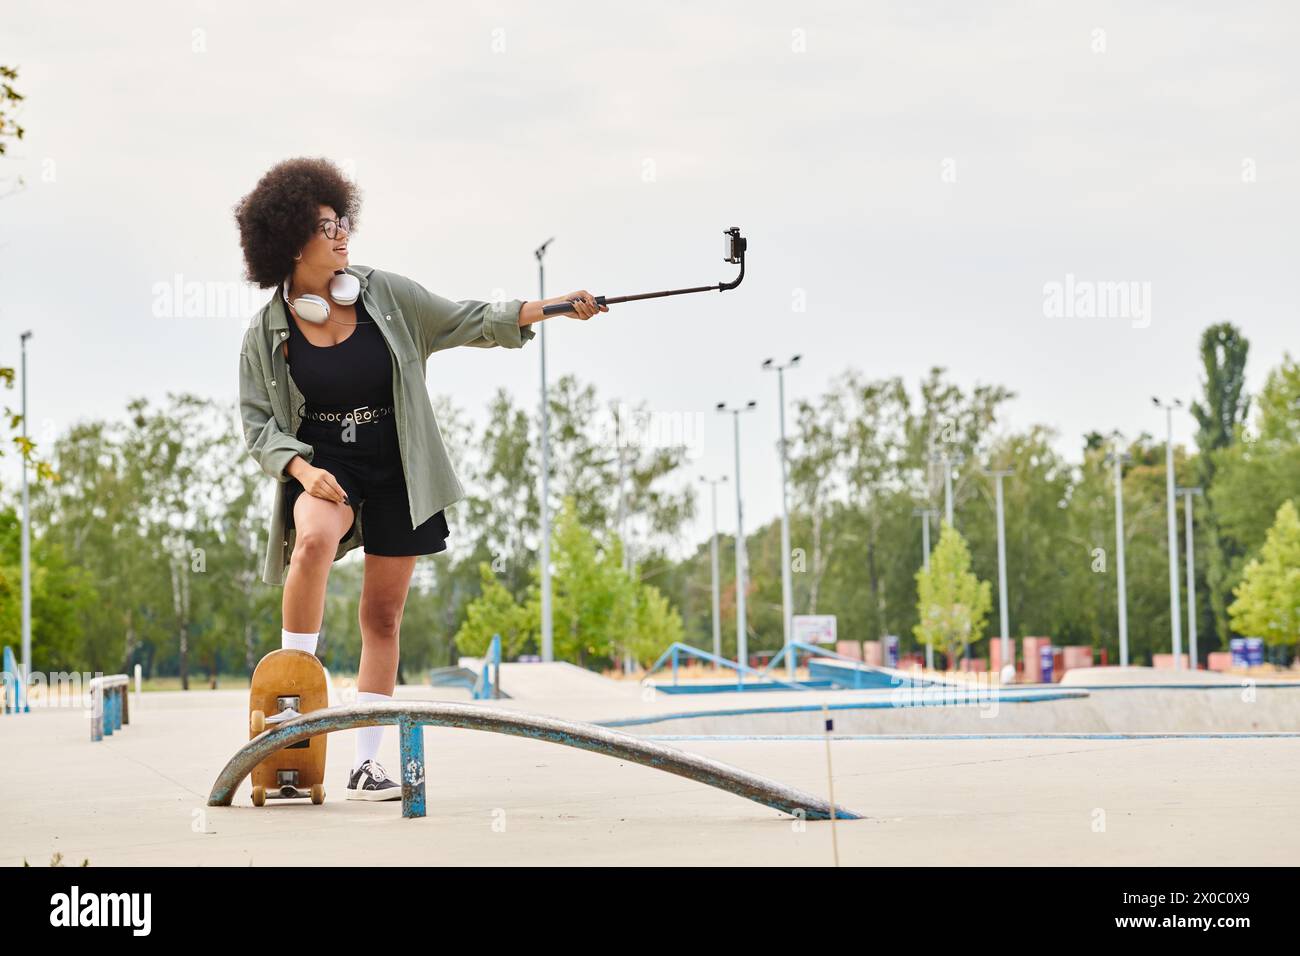 A young African American woman with curly hair skillfully balances on a skateboard at a vibrant skate park. Stock Photo